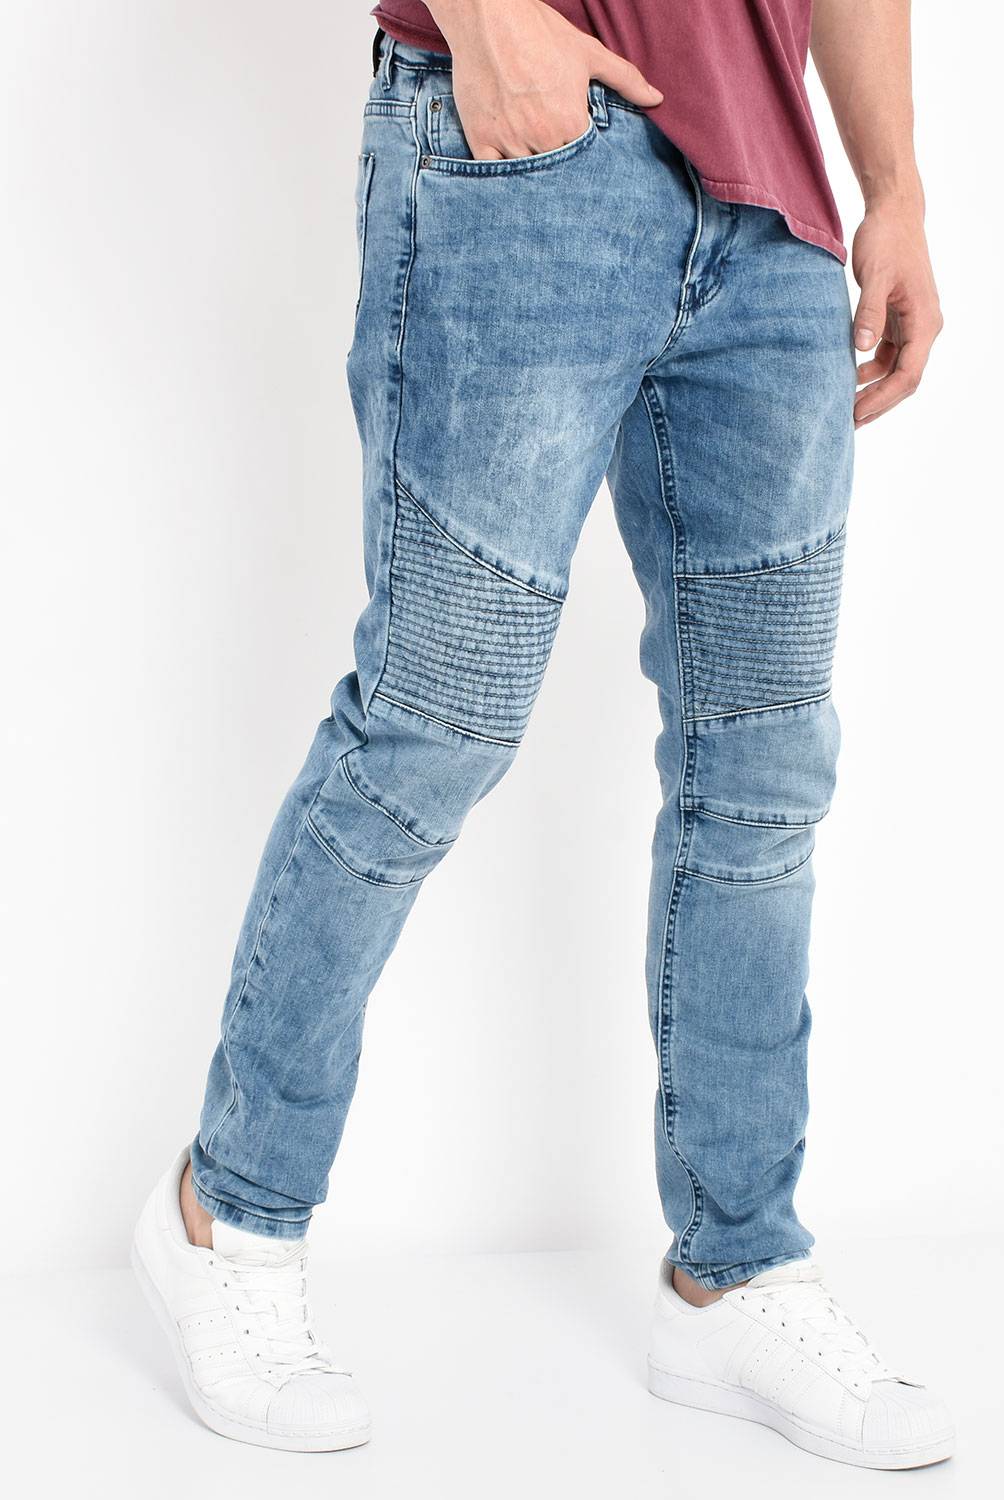 MOSSIMO - Jeans